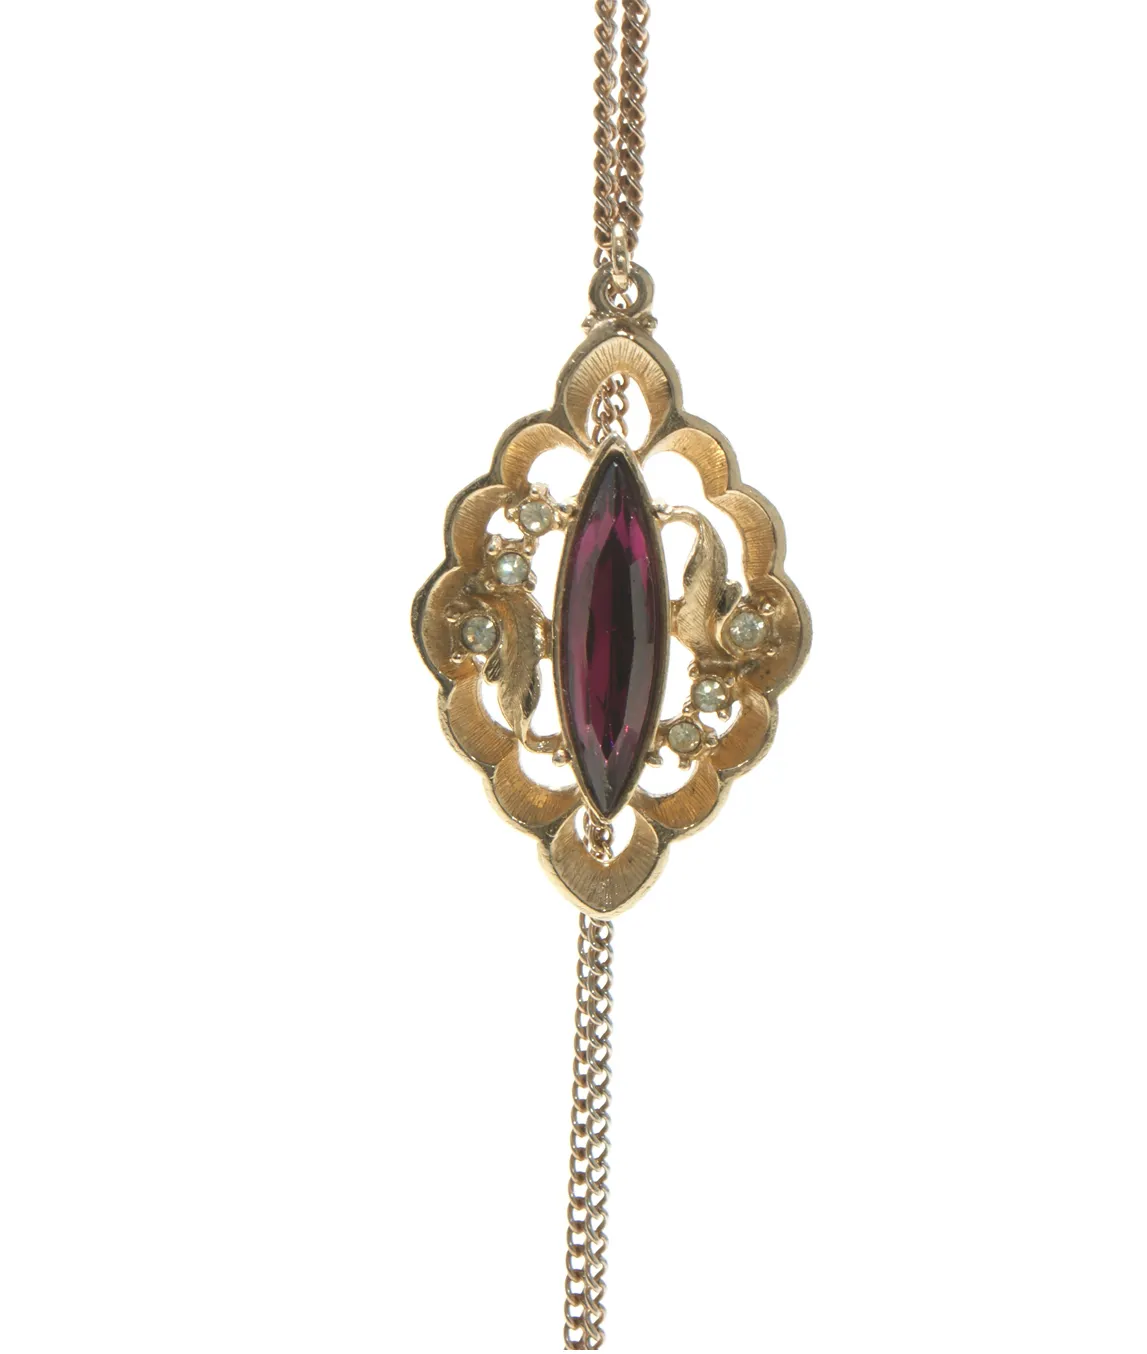 Faux Gold and ruby pendant by Sarah Coventry